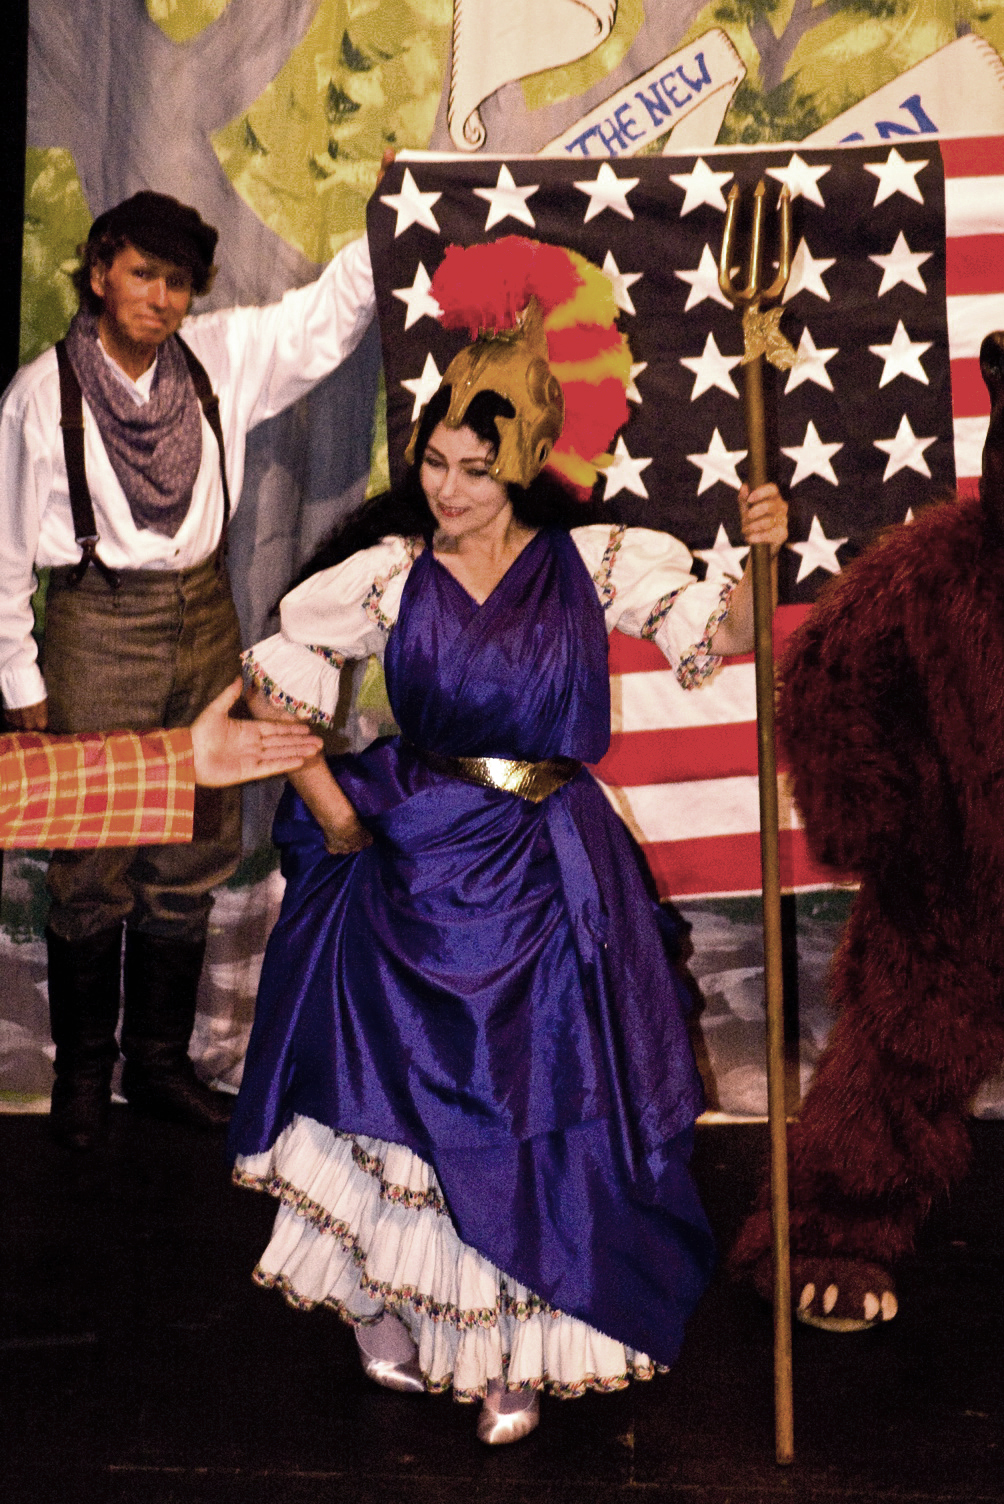 As Gold Rush Era 'It' girl Lola Montez portraying the goddess Eureka in a patriotic finale at Old Sacramento's Eagle Theatre, Time Travel Weekends 2011 with Red Barn Productions.